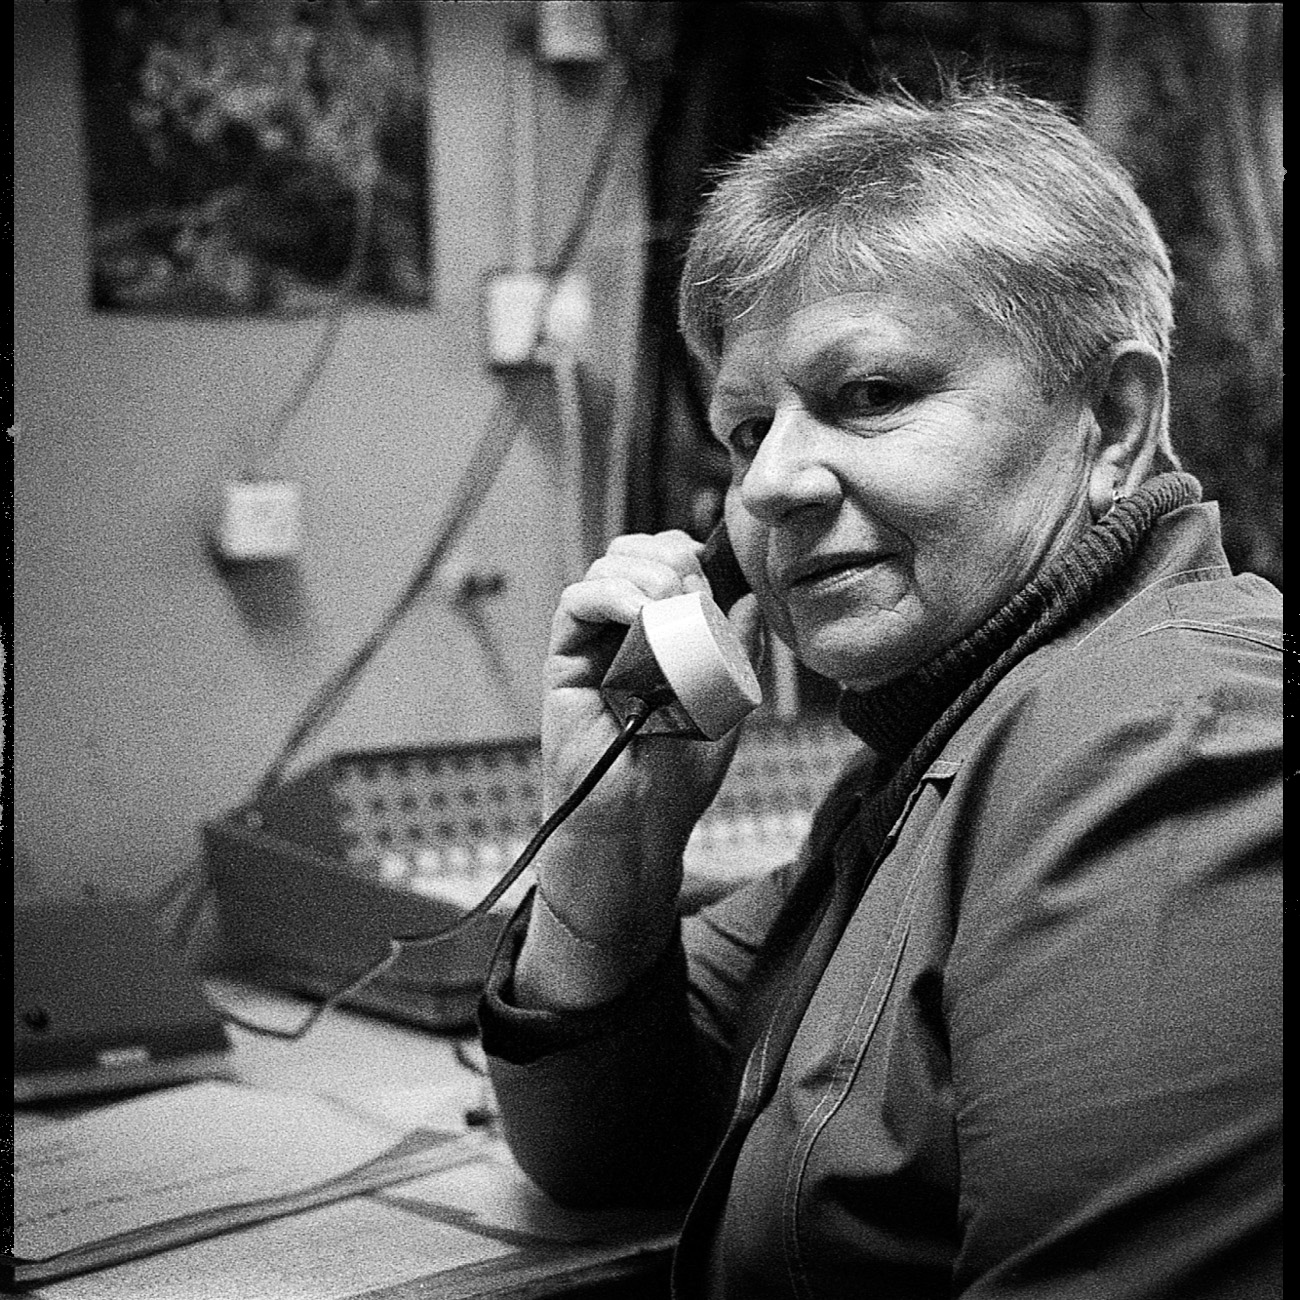 Vera Avsineeva came to the plant in 1972 to work as a conveyor operator. “The job was held in high esteem. It was always hard, but interesting work, operating the programmer and controllers, for example. There was always a lot to learn,” she says. “The plant operated 24/7.”